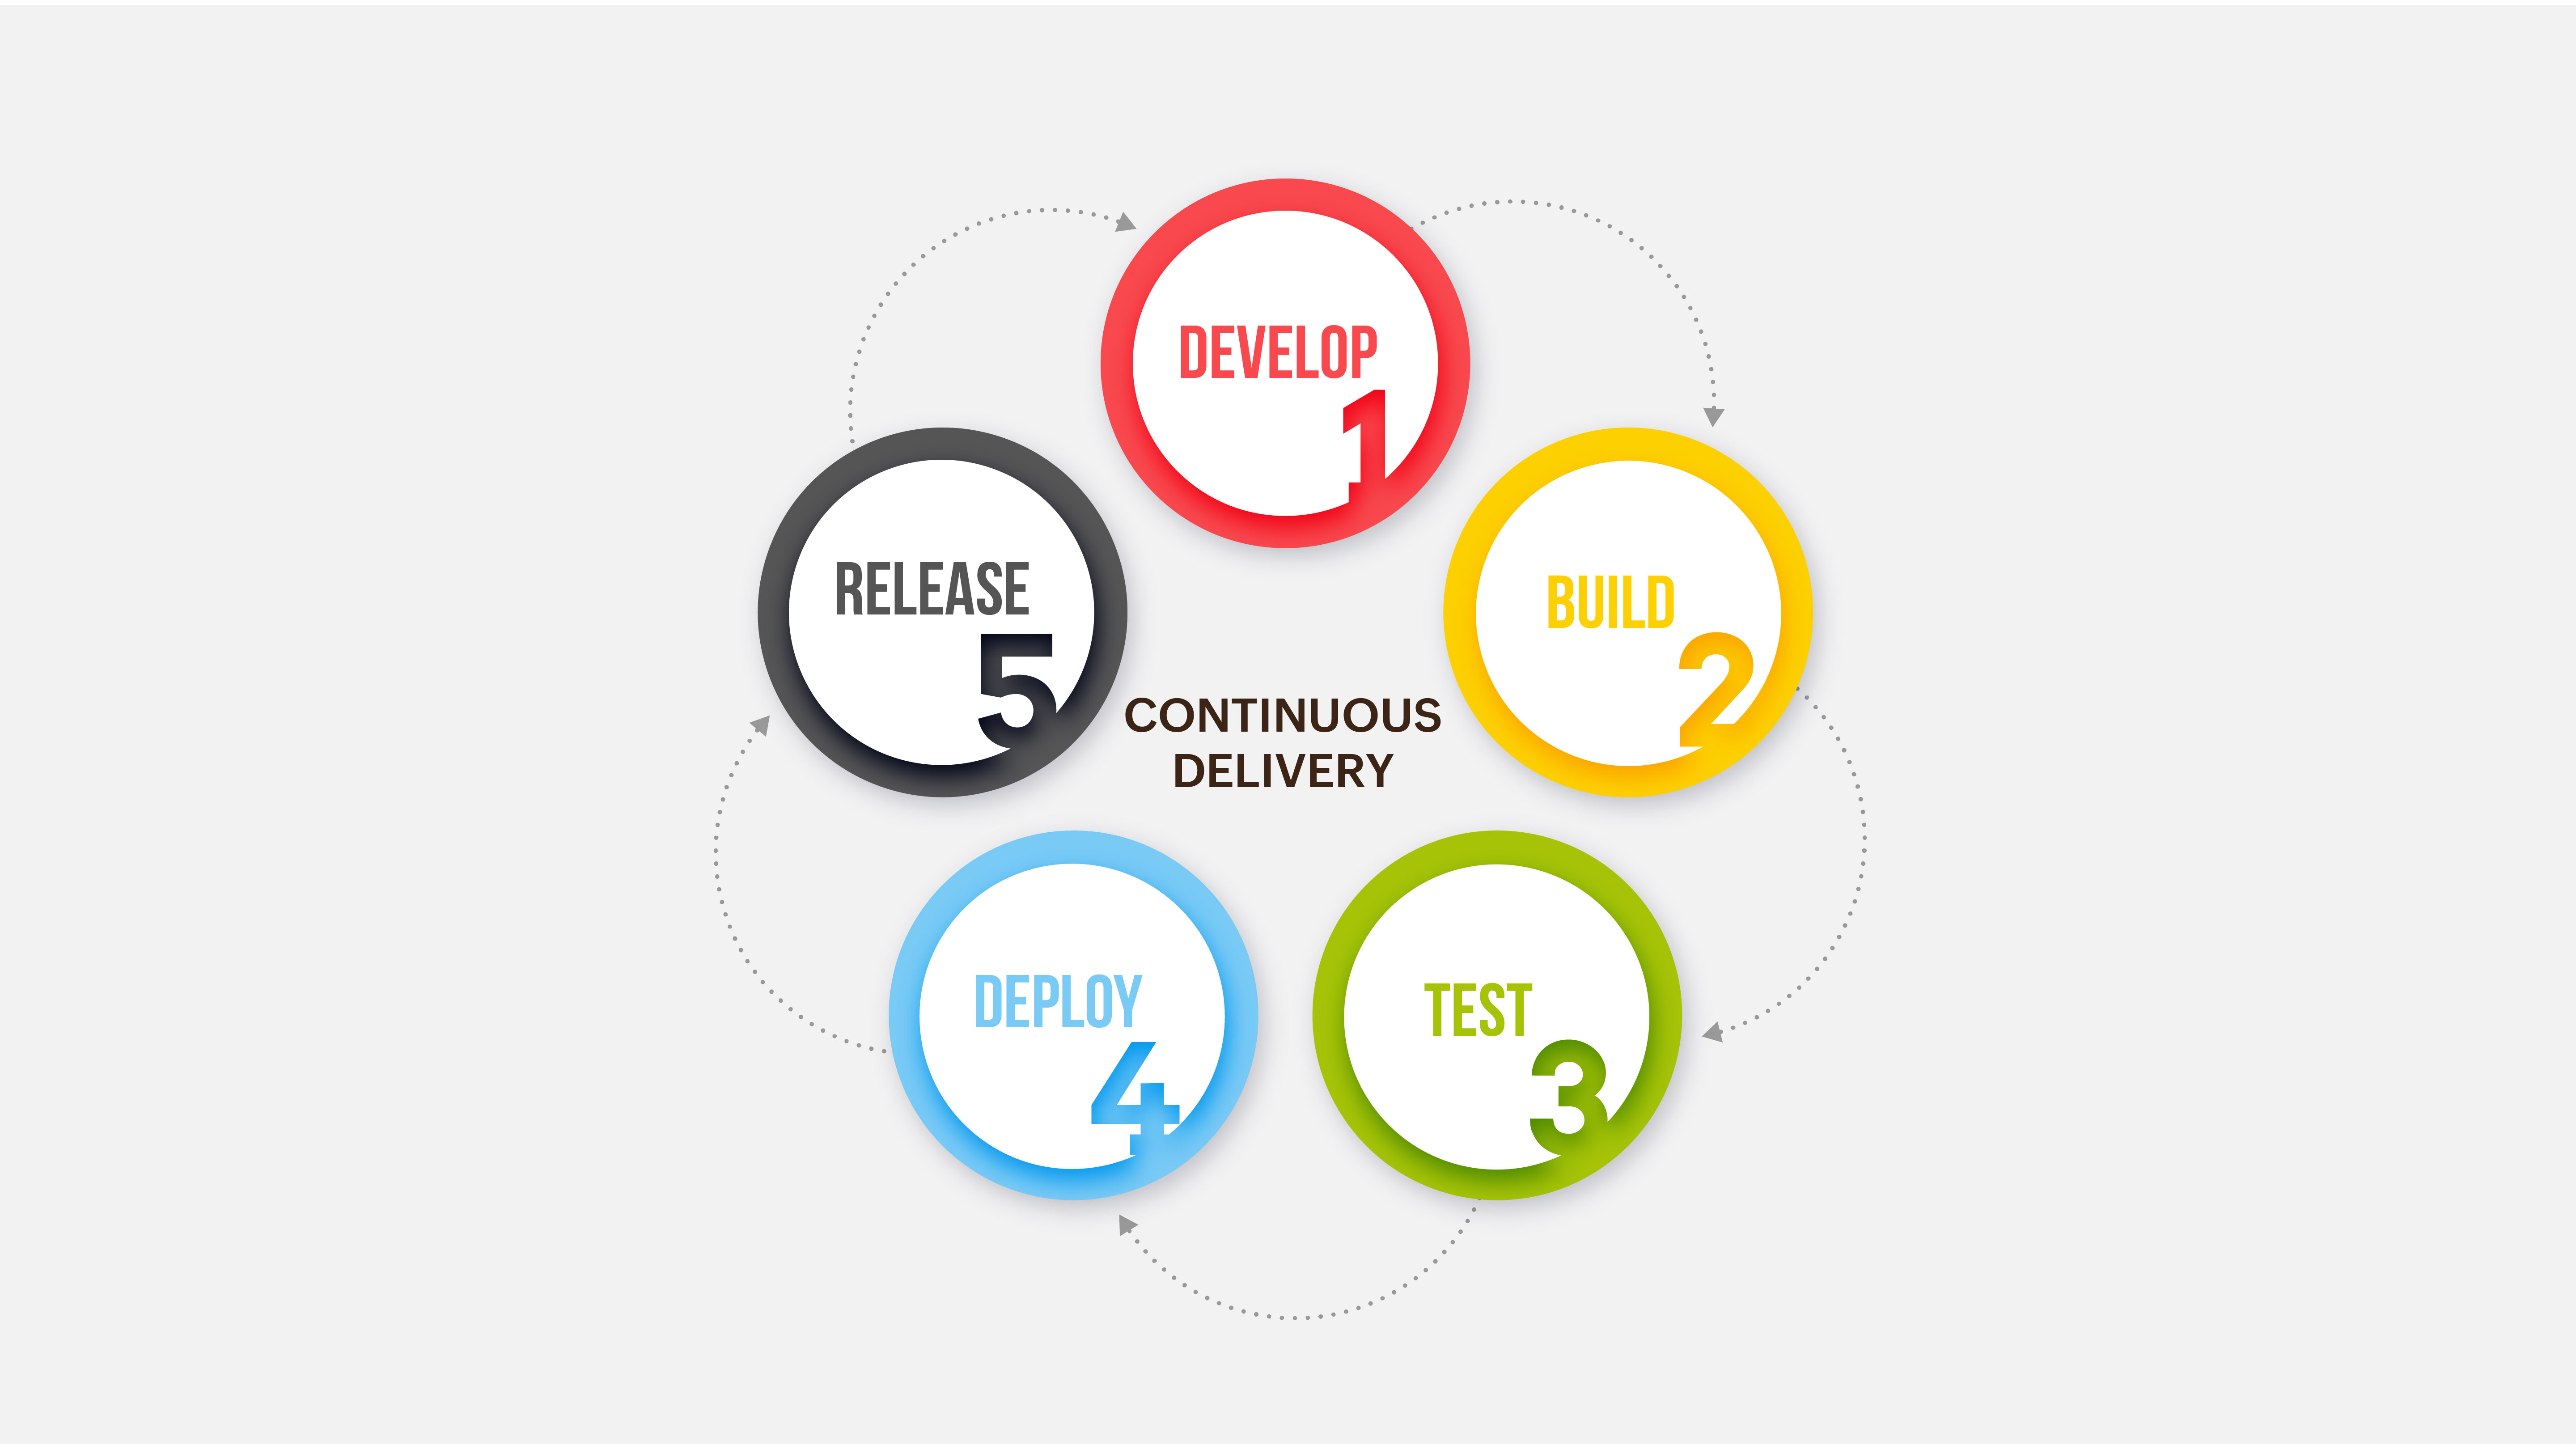 "an illustration showing five stages of continuous delivery: develop, build, test, deploy, and release "